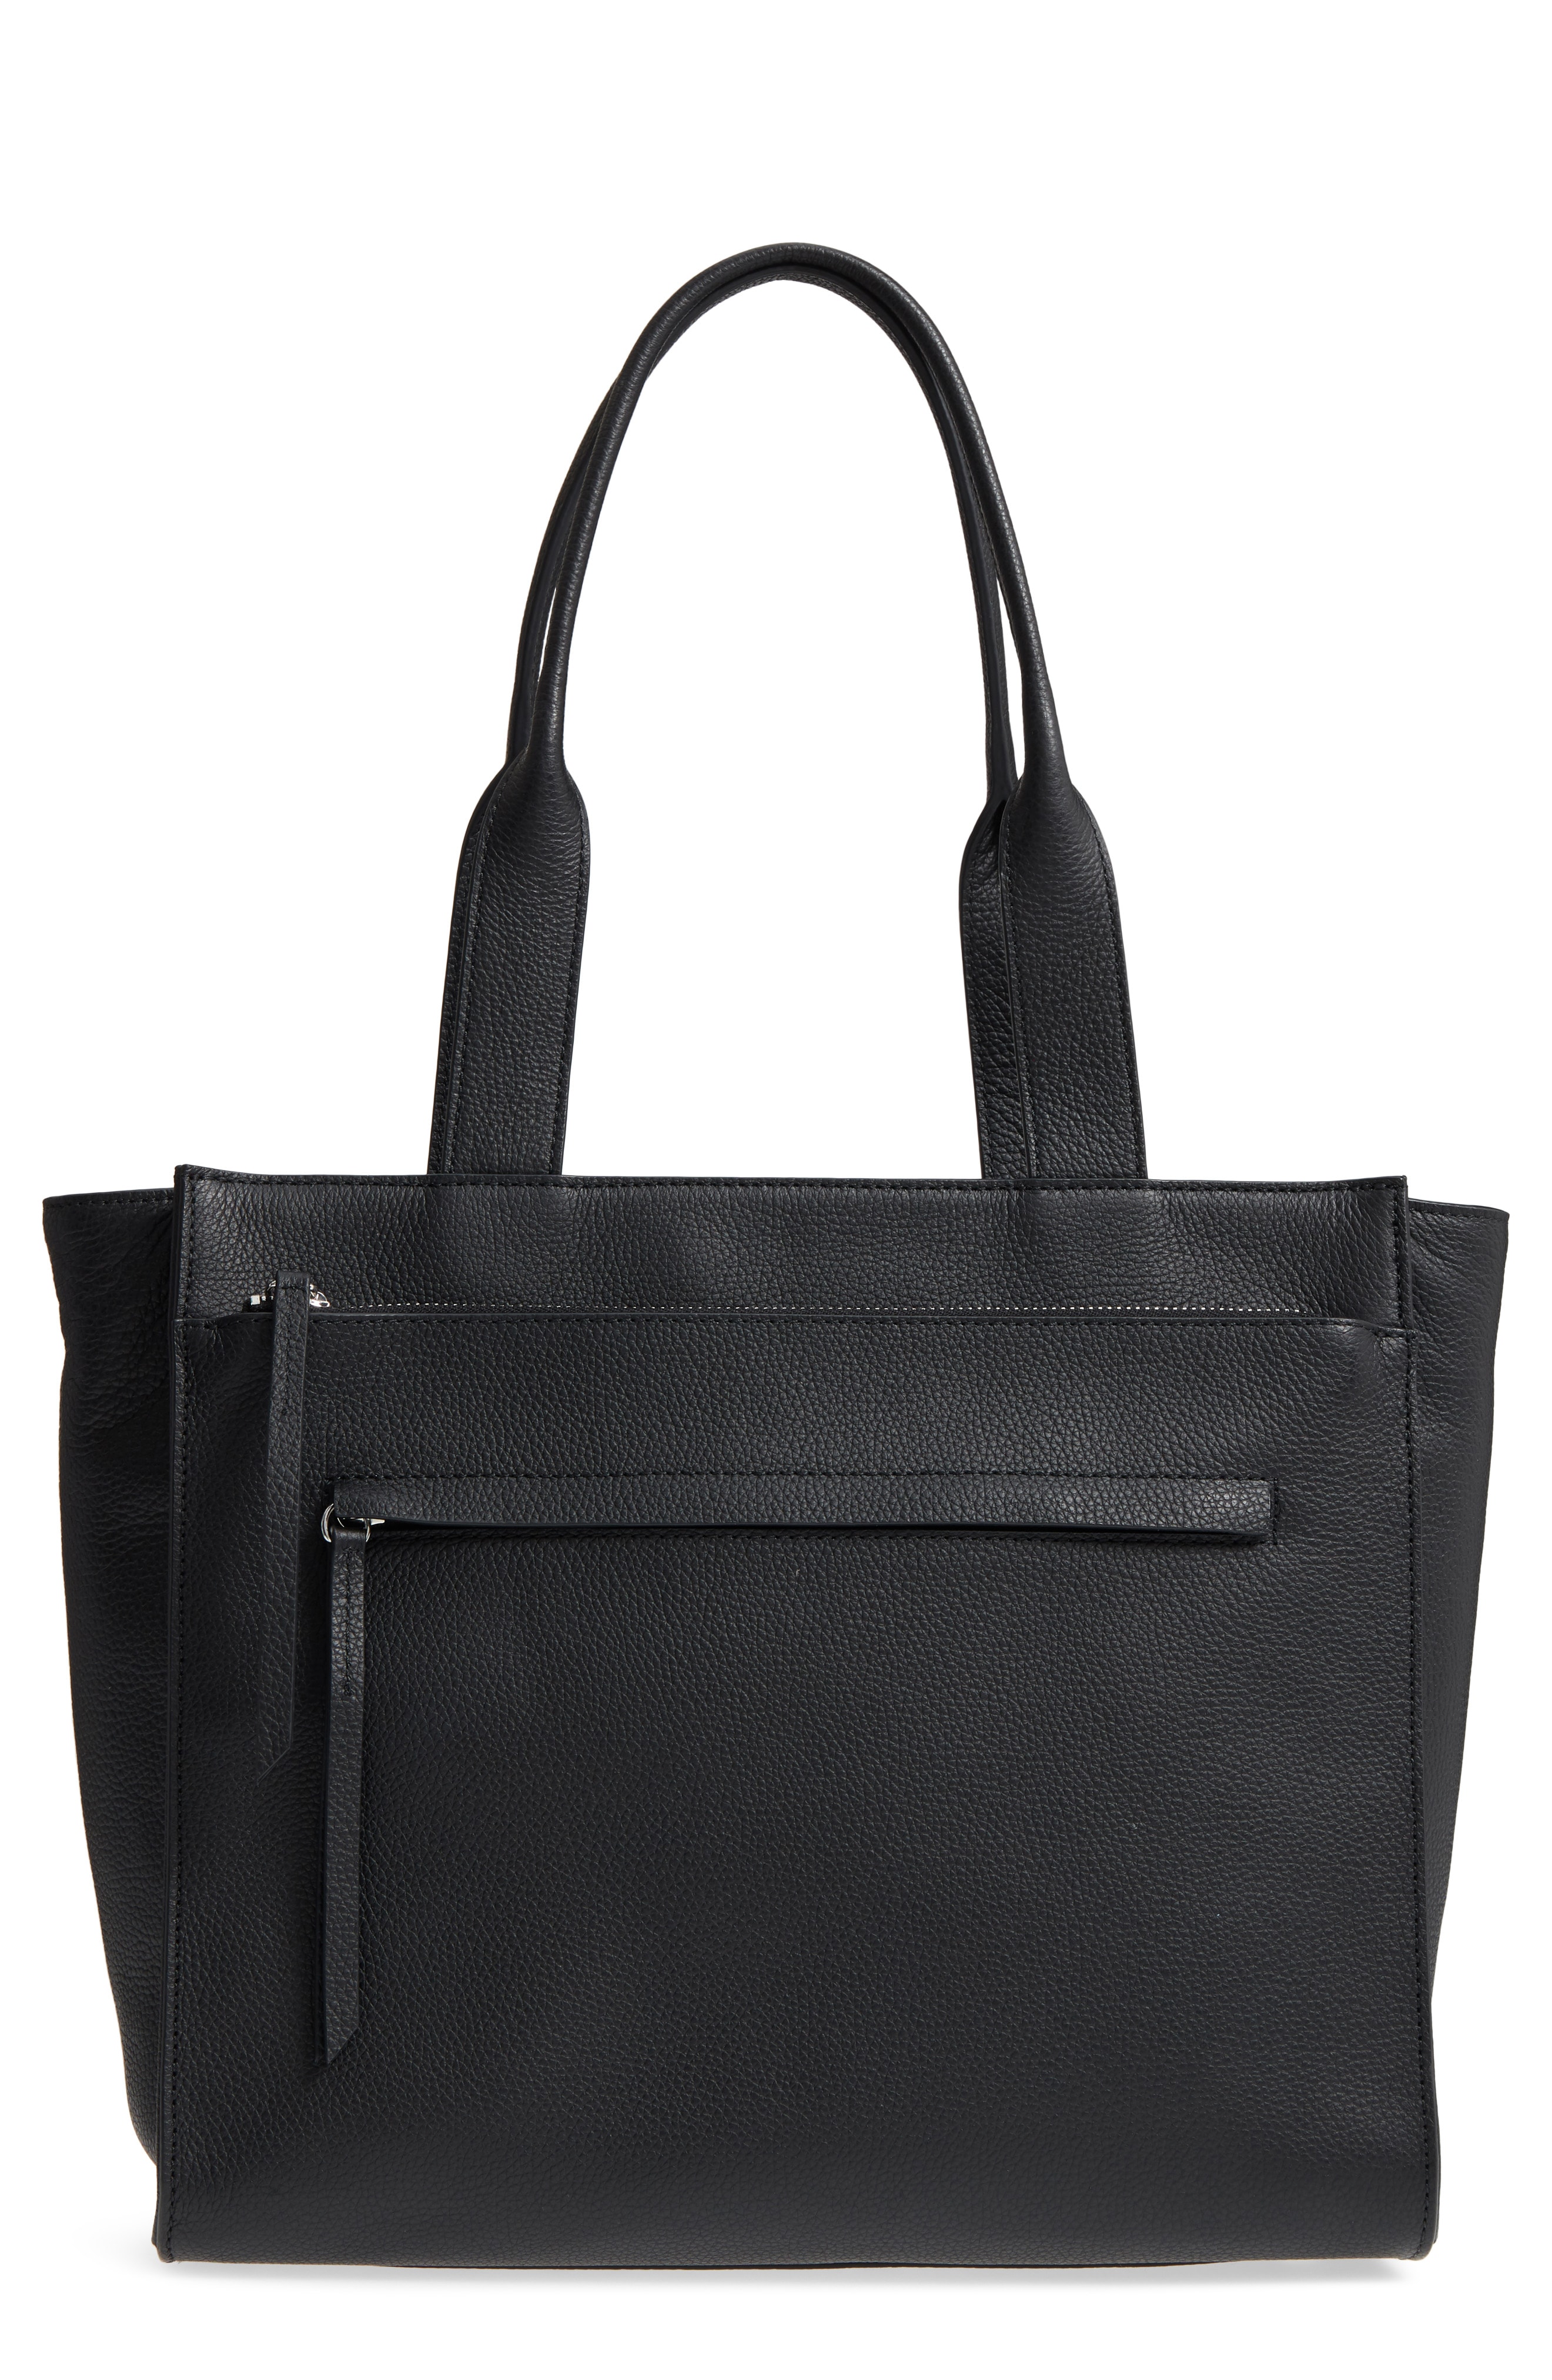 Bags in black are available in various designs